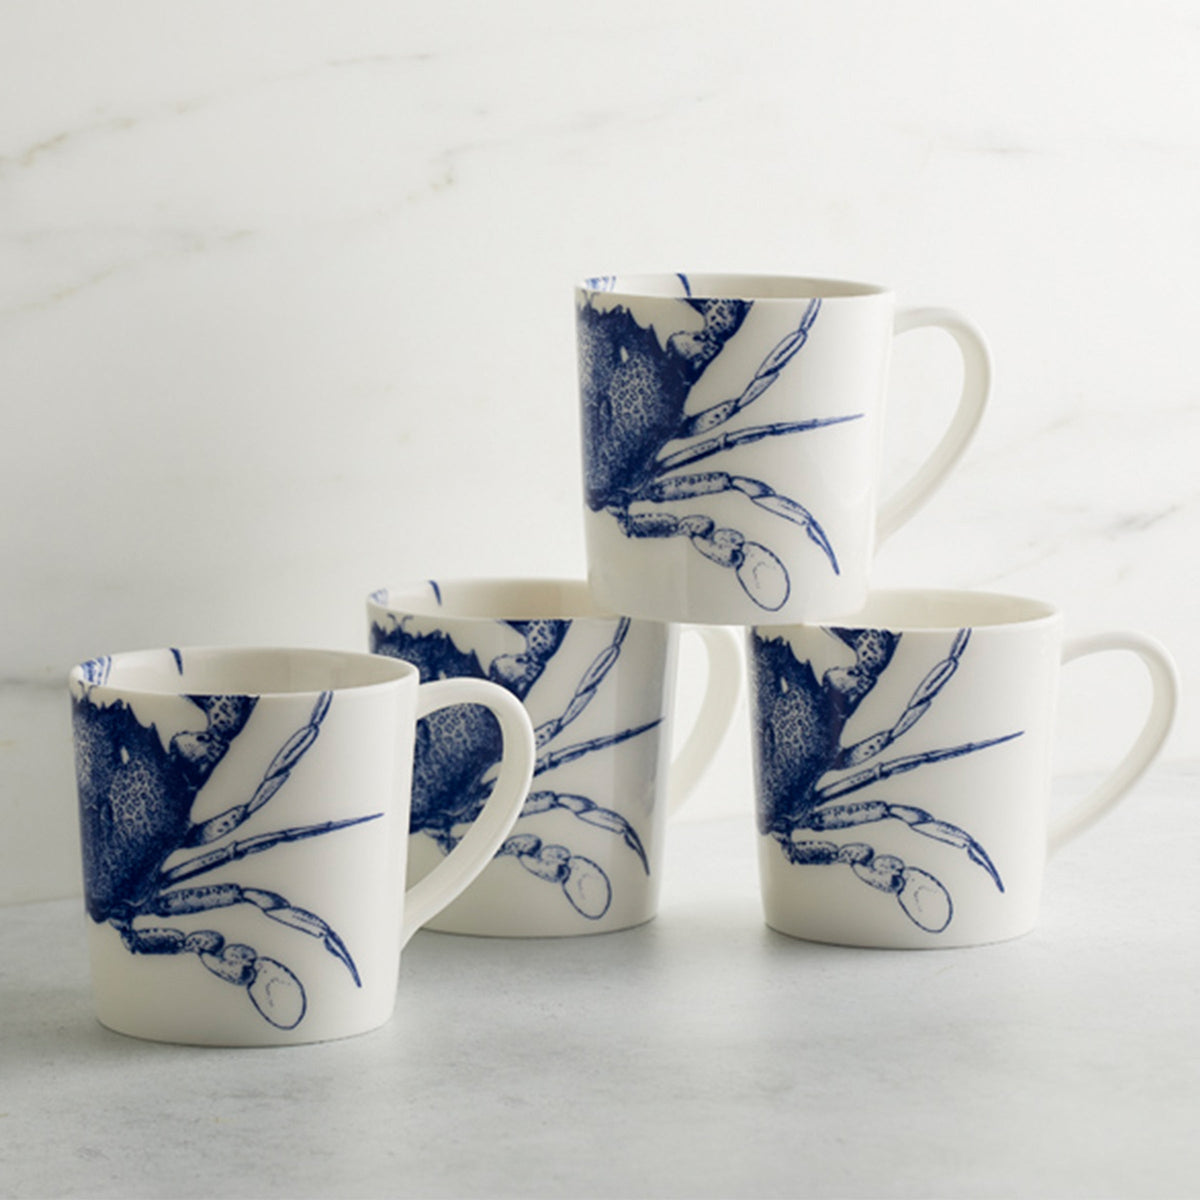 Four white, high-fired porcelain mugs with blue crab illustrations are stacked in a pyramid formation on a marble surface. These Caskata Artisanal Home Crab Mugs are not only visually appealing but also dishwasher safe for easy cleaning.